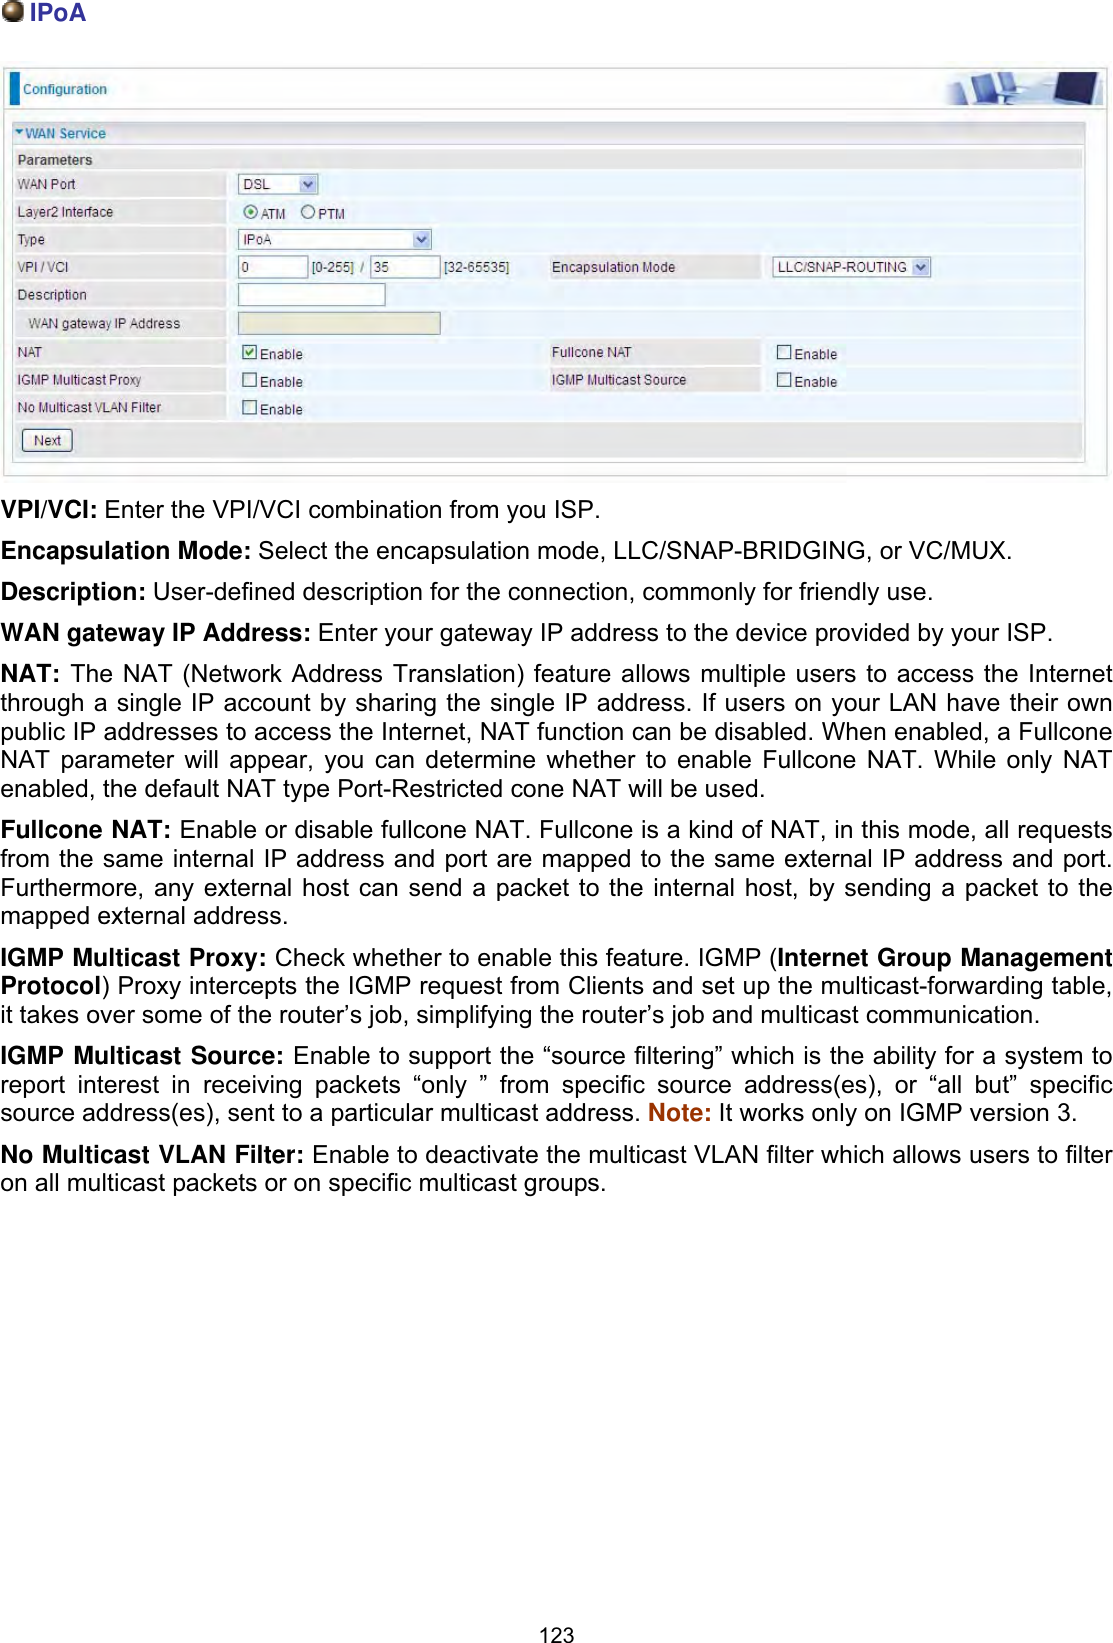 123IPoAVPI/VCI: Enter the VPI/VCI combination from you ISP. Encapsulation Mode: Select the encapsulation mode, LLC/SNAP-BRIDGING, or VC/MUX.Description: User-defined description for the connection, commonly for friendly use.WAN gateway IP Address: Enter your gateway IP address to the device provided by your ISP. NAT: The NAT (Network Address Translation) feature allows multiple users to access the Internet through a single IP account by sharing the single IP address. If users on your LAN have their own public IP addresses to access the Internet, NAT function can be disabled. When enabled, a Fullcone NAT parameter will appear, you can determine whether to enable Fullcone NAT. While only NAT enabled, the default NAT type Port-Restricted cone NAT will be used.  Fullcone NAT: Enable or disable fullcone NAT. Fullcone is a kind of NAT, in this mode, all requests from the same internal IP address and port are mapped to the same external IP address and port. Furthermore, any external host can send a packet to the internal host, by sending a packet to the mapped external address. IGMP Multicast Proxy: Check whether to enable this feature. IGMP (Internet Group Management Protocol) Proxy intercepts the IGMP request from Clients and set up the multicast-forwarding table, it takes over some of the router’s job, simplifying the router’s job and multicast communication. IGMP Multicast Source: Enable to support the “source filtering” which is the ability for a system to report interest in receiving packets “only ” from specific source address(es), or “all but” specific source address(es), sent to a particular multicast address. Note: It works only on IGMP version 3. No Multicast VLAN Filter: Enable to deactivate the multicast VLAN filter which allows users to filter on all multicast packets or on specific multicast groups.